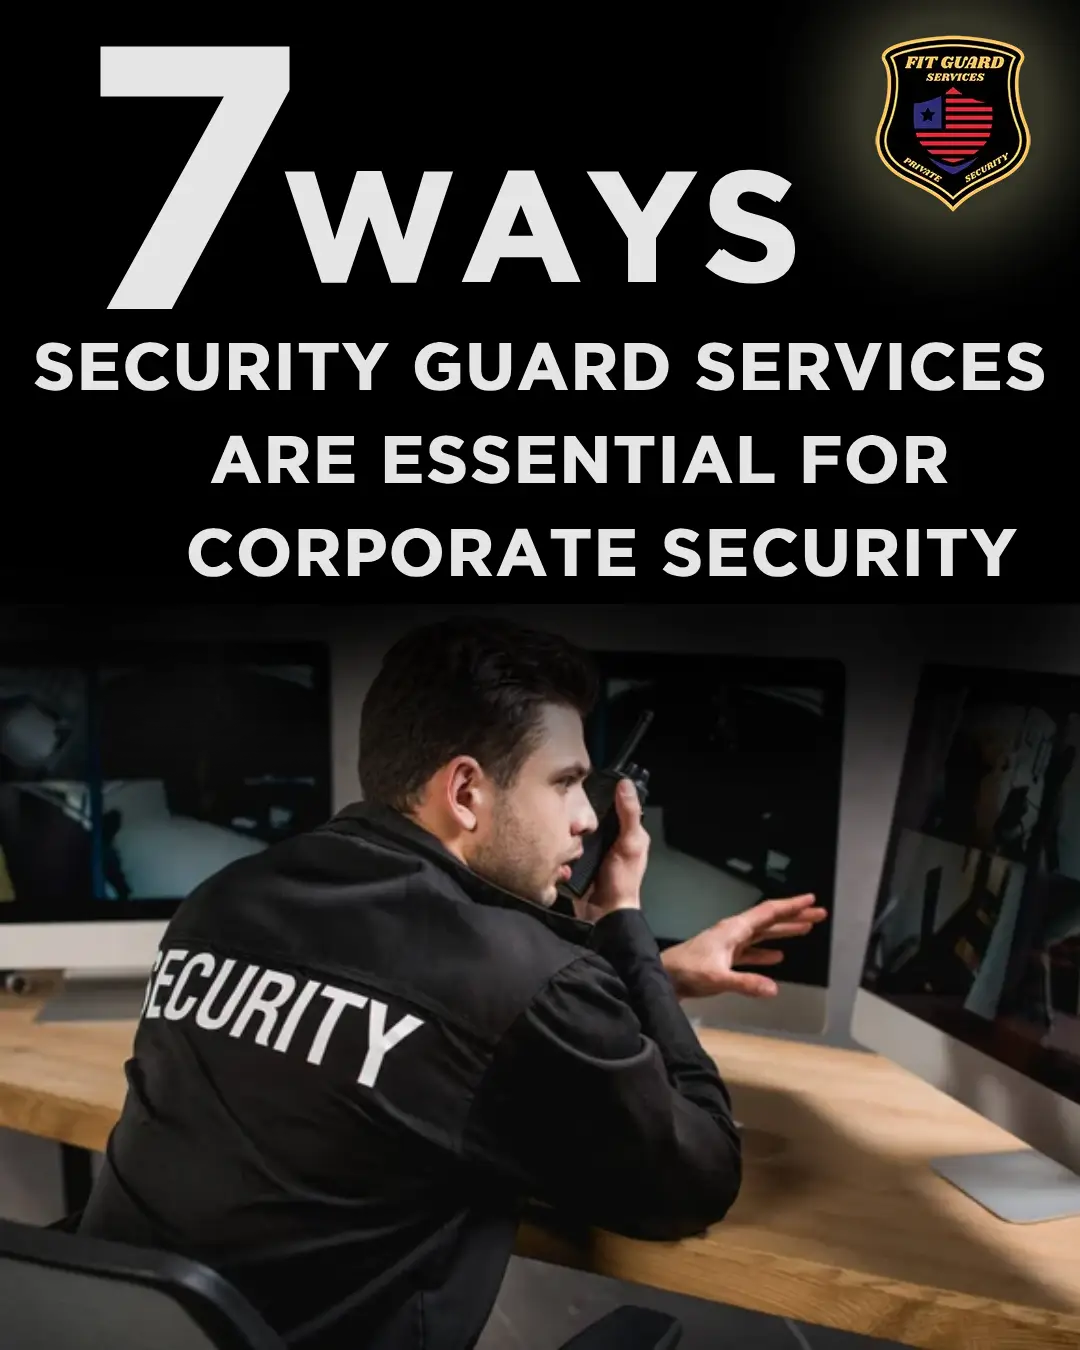 7 Ways Security Guard Services Are Essential for Corporate Security